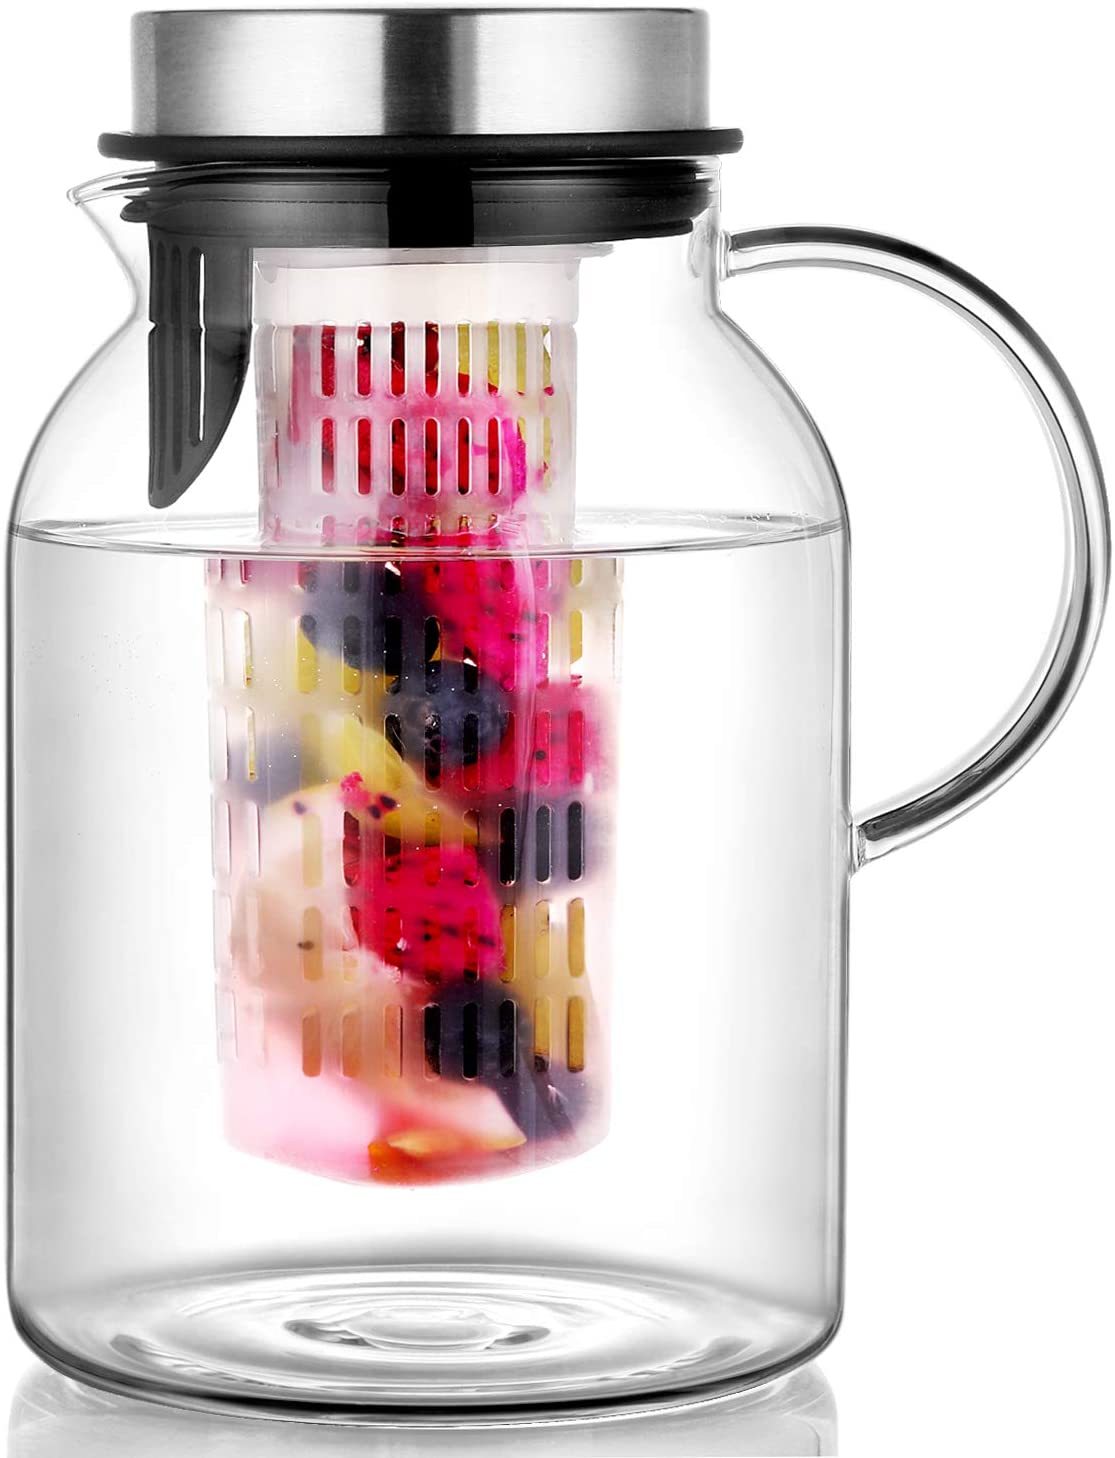 Hiware Lead-Free Fruit Infuser Glass Pitcher, 64-Ounce